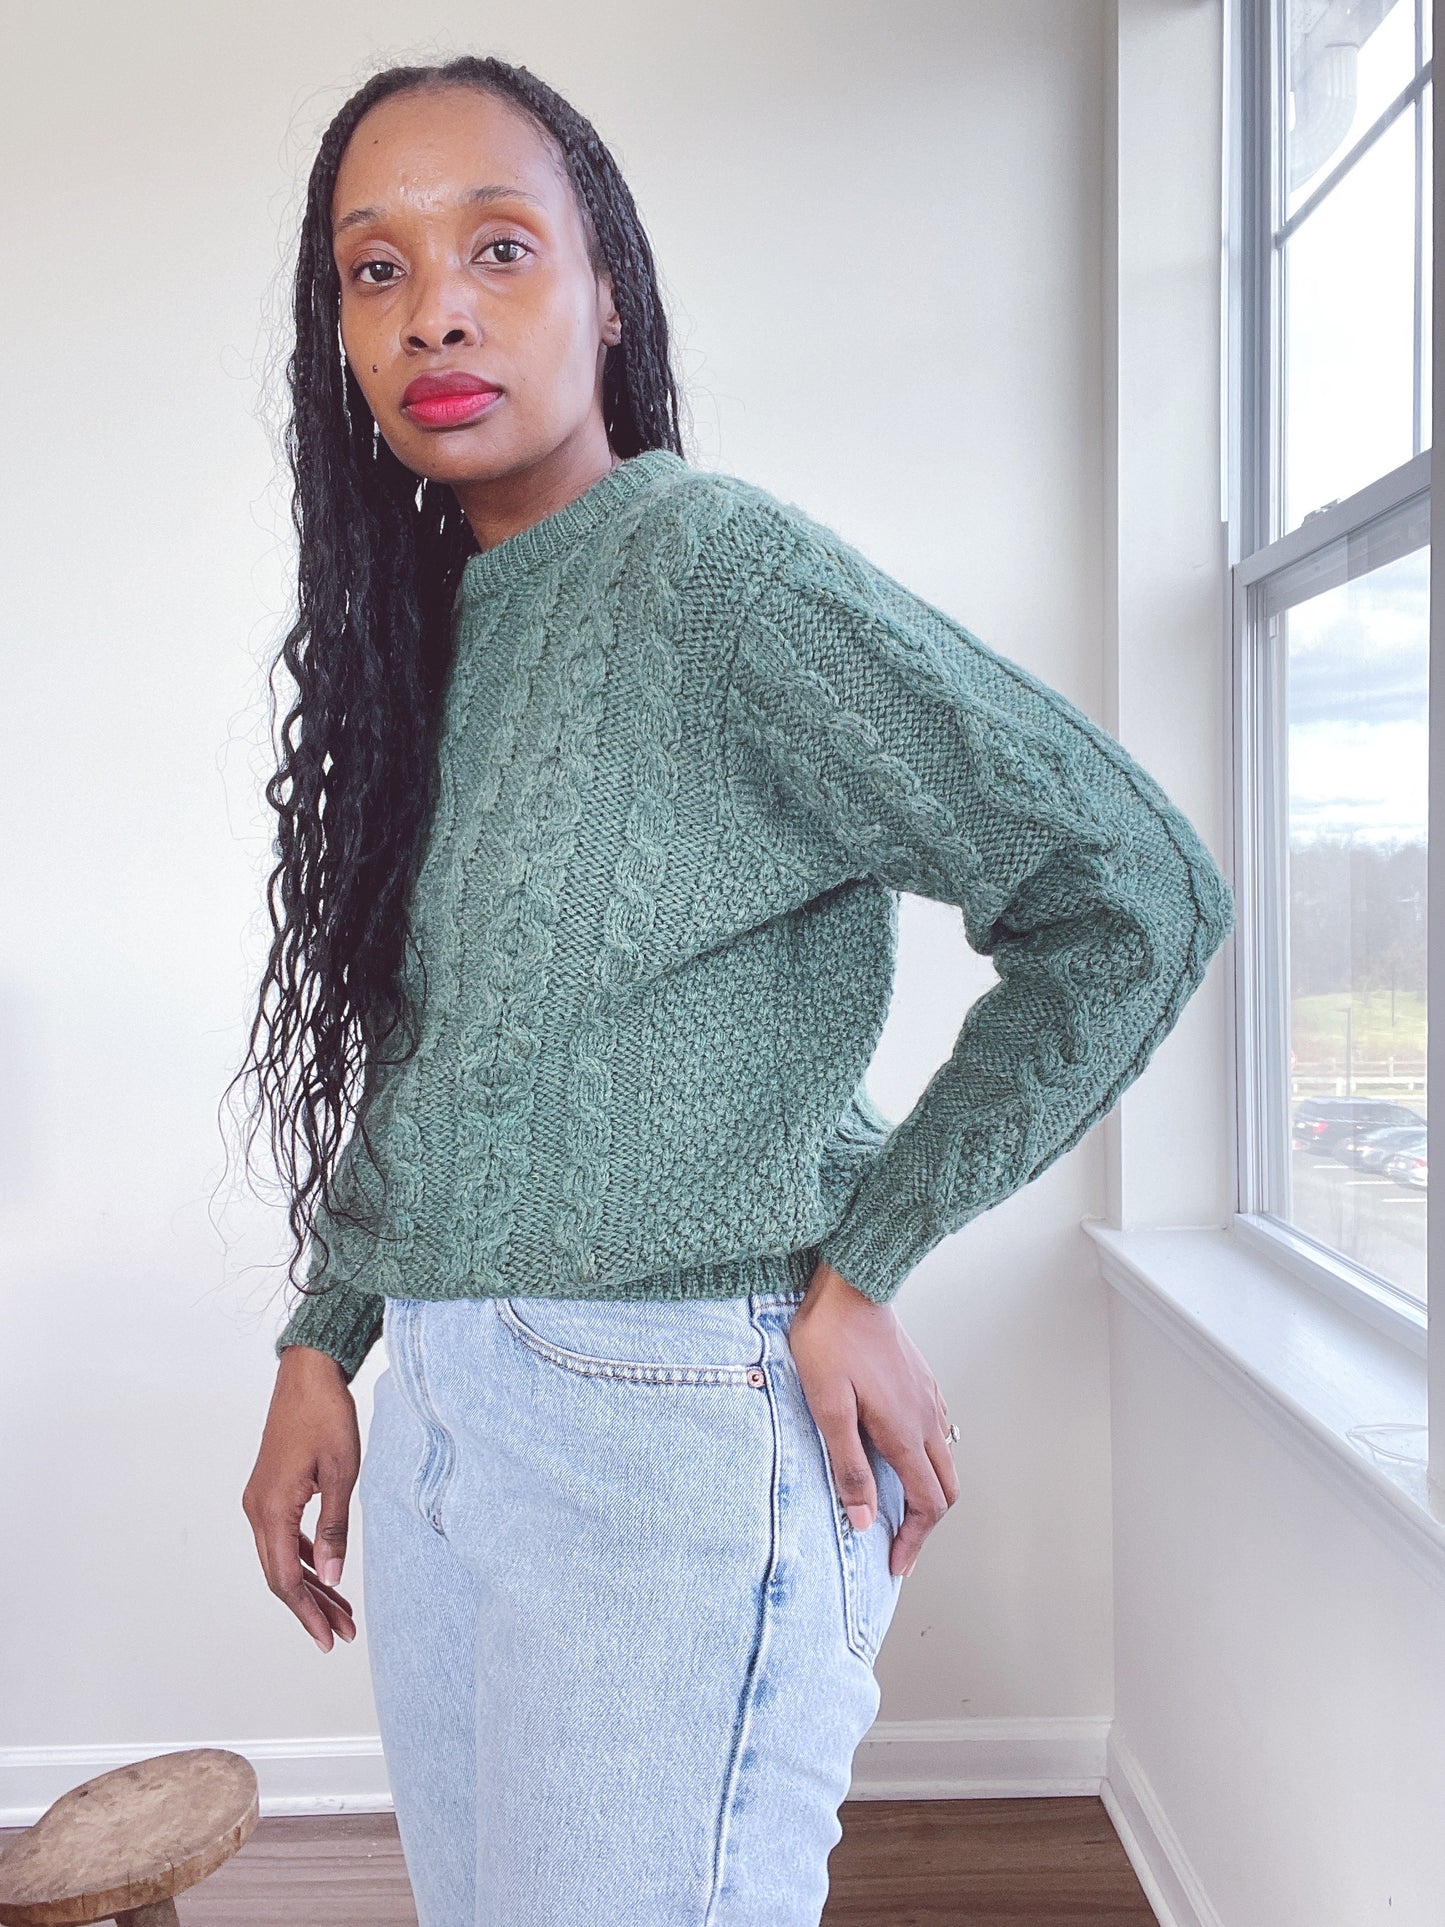 LL Bean Wool Green Cable Knit Sweater